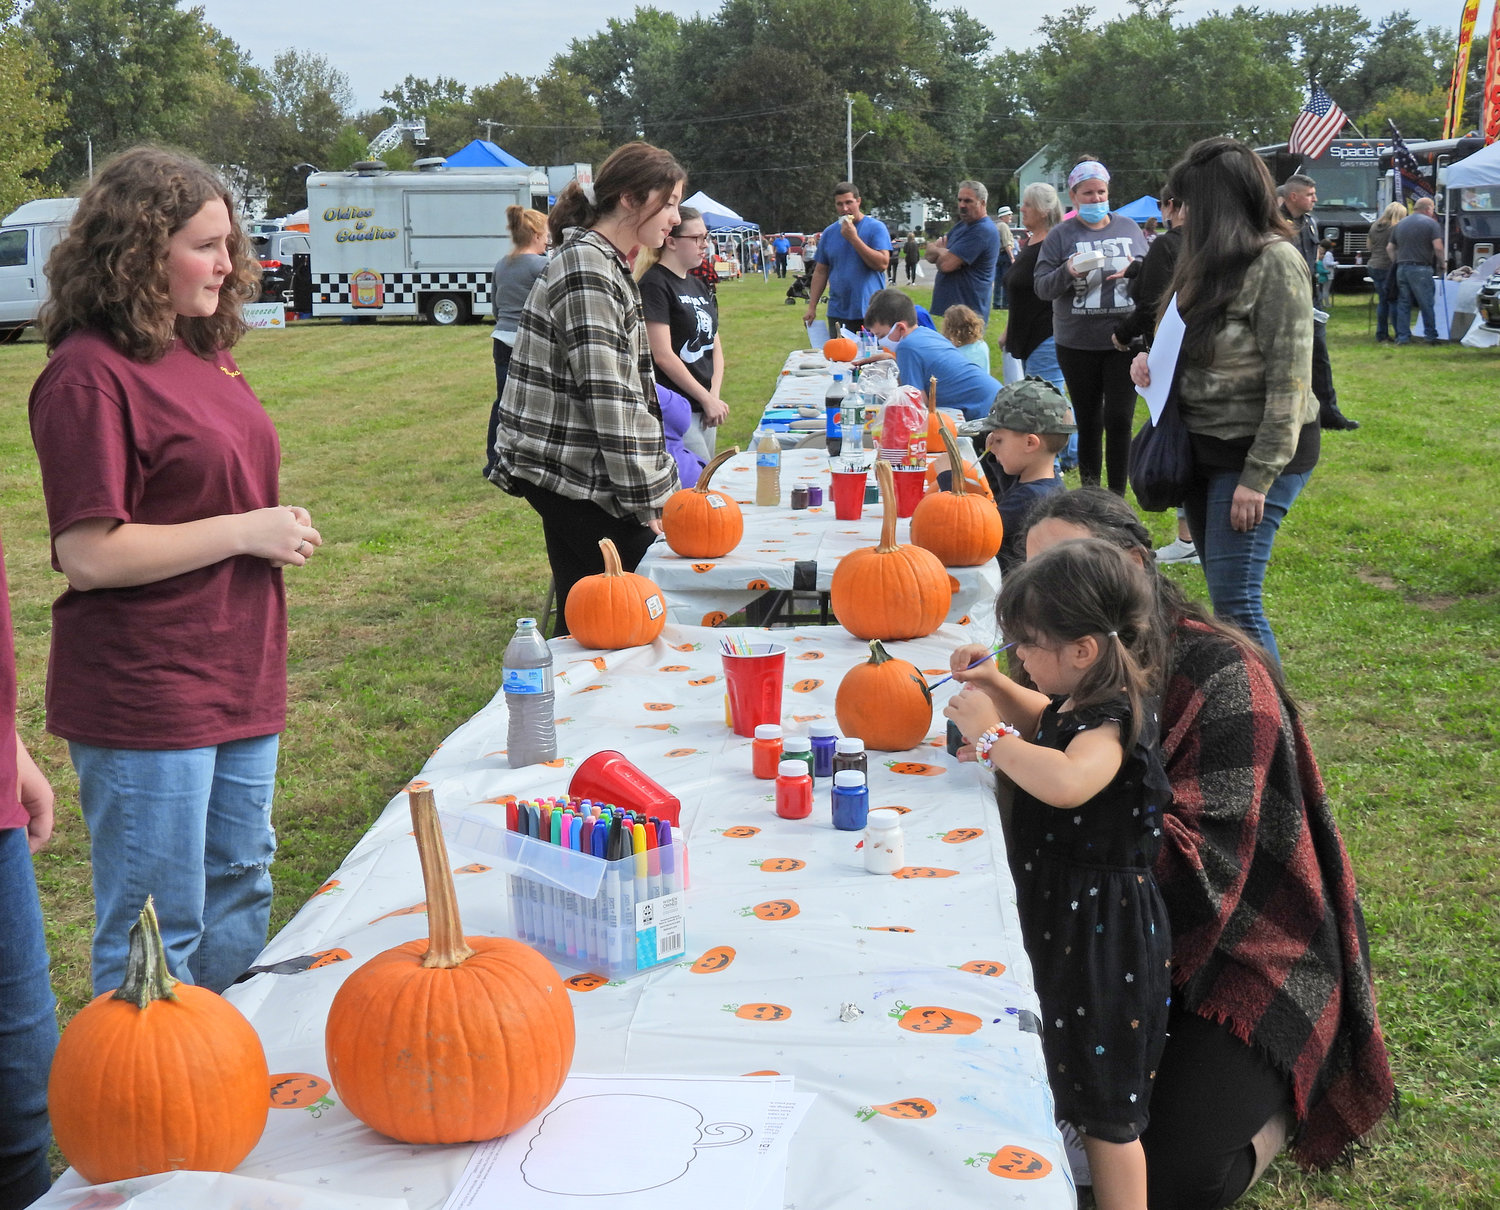 Children paint pictures on their pumpkins at last year's Fall Fest in Oneida.